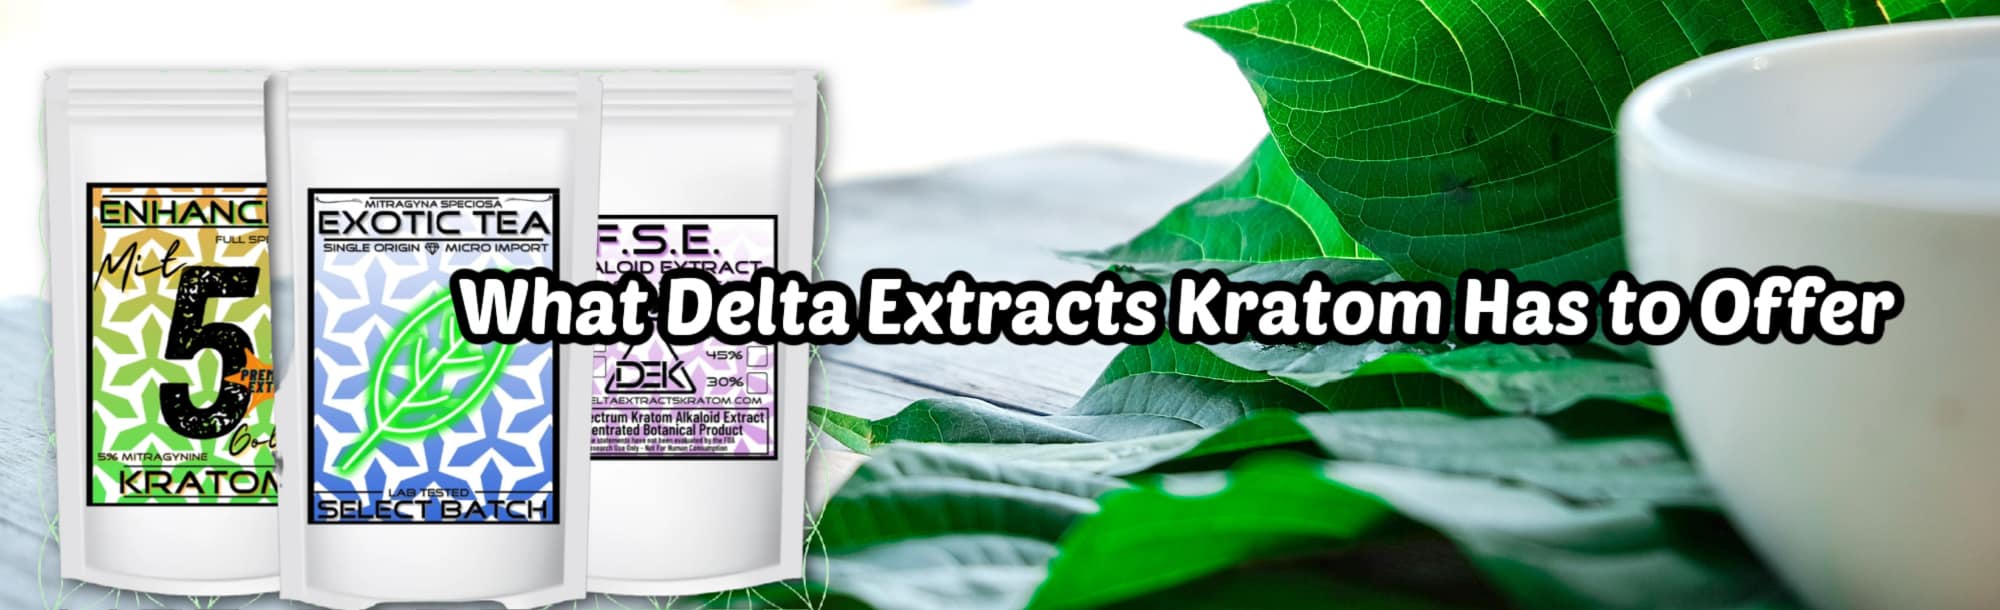 image of what delta extract kratom has to offer